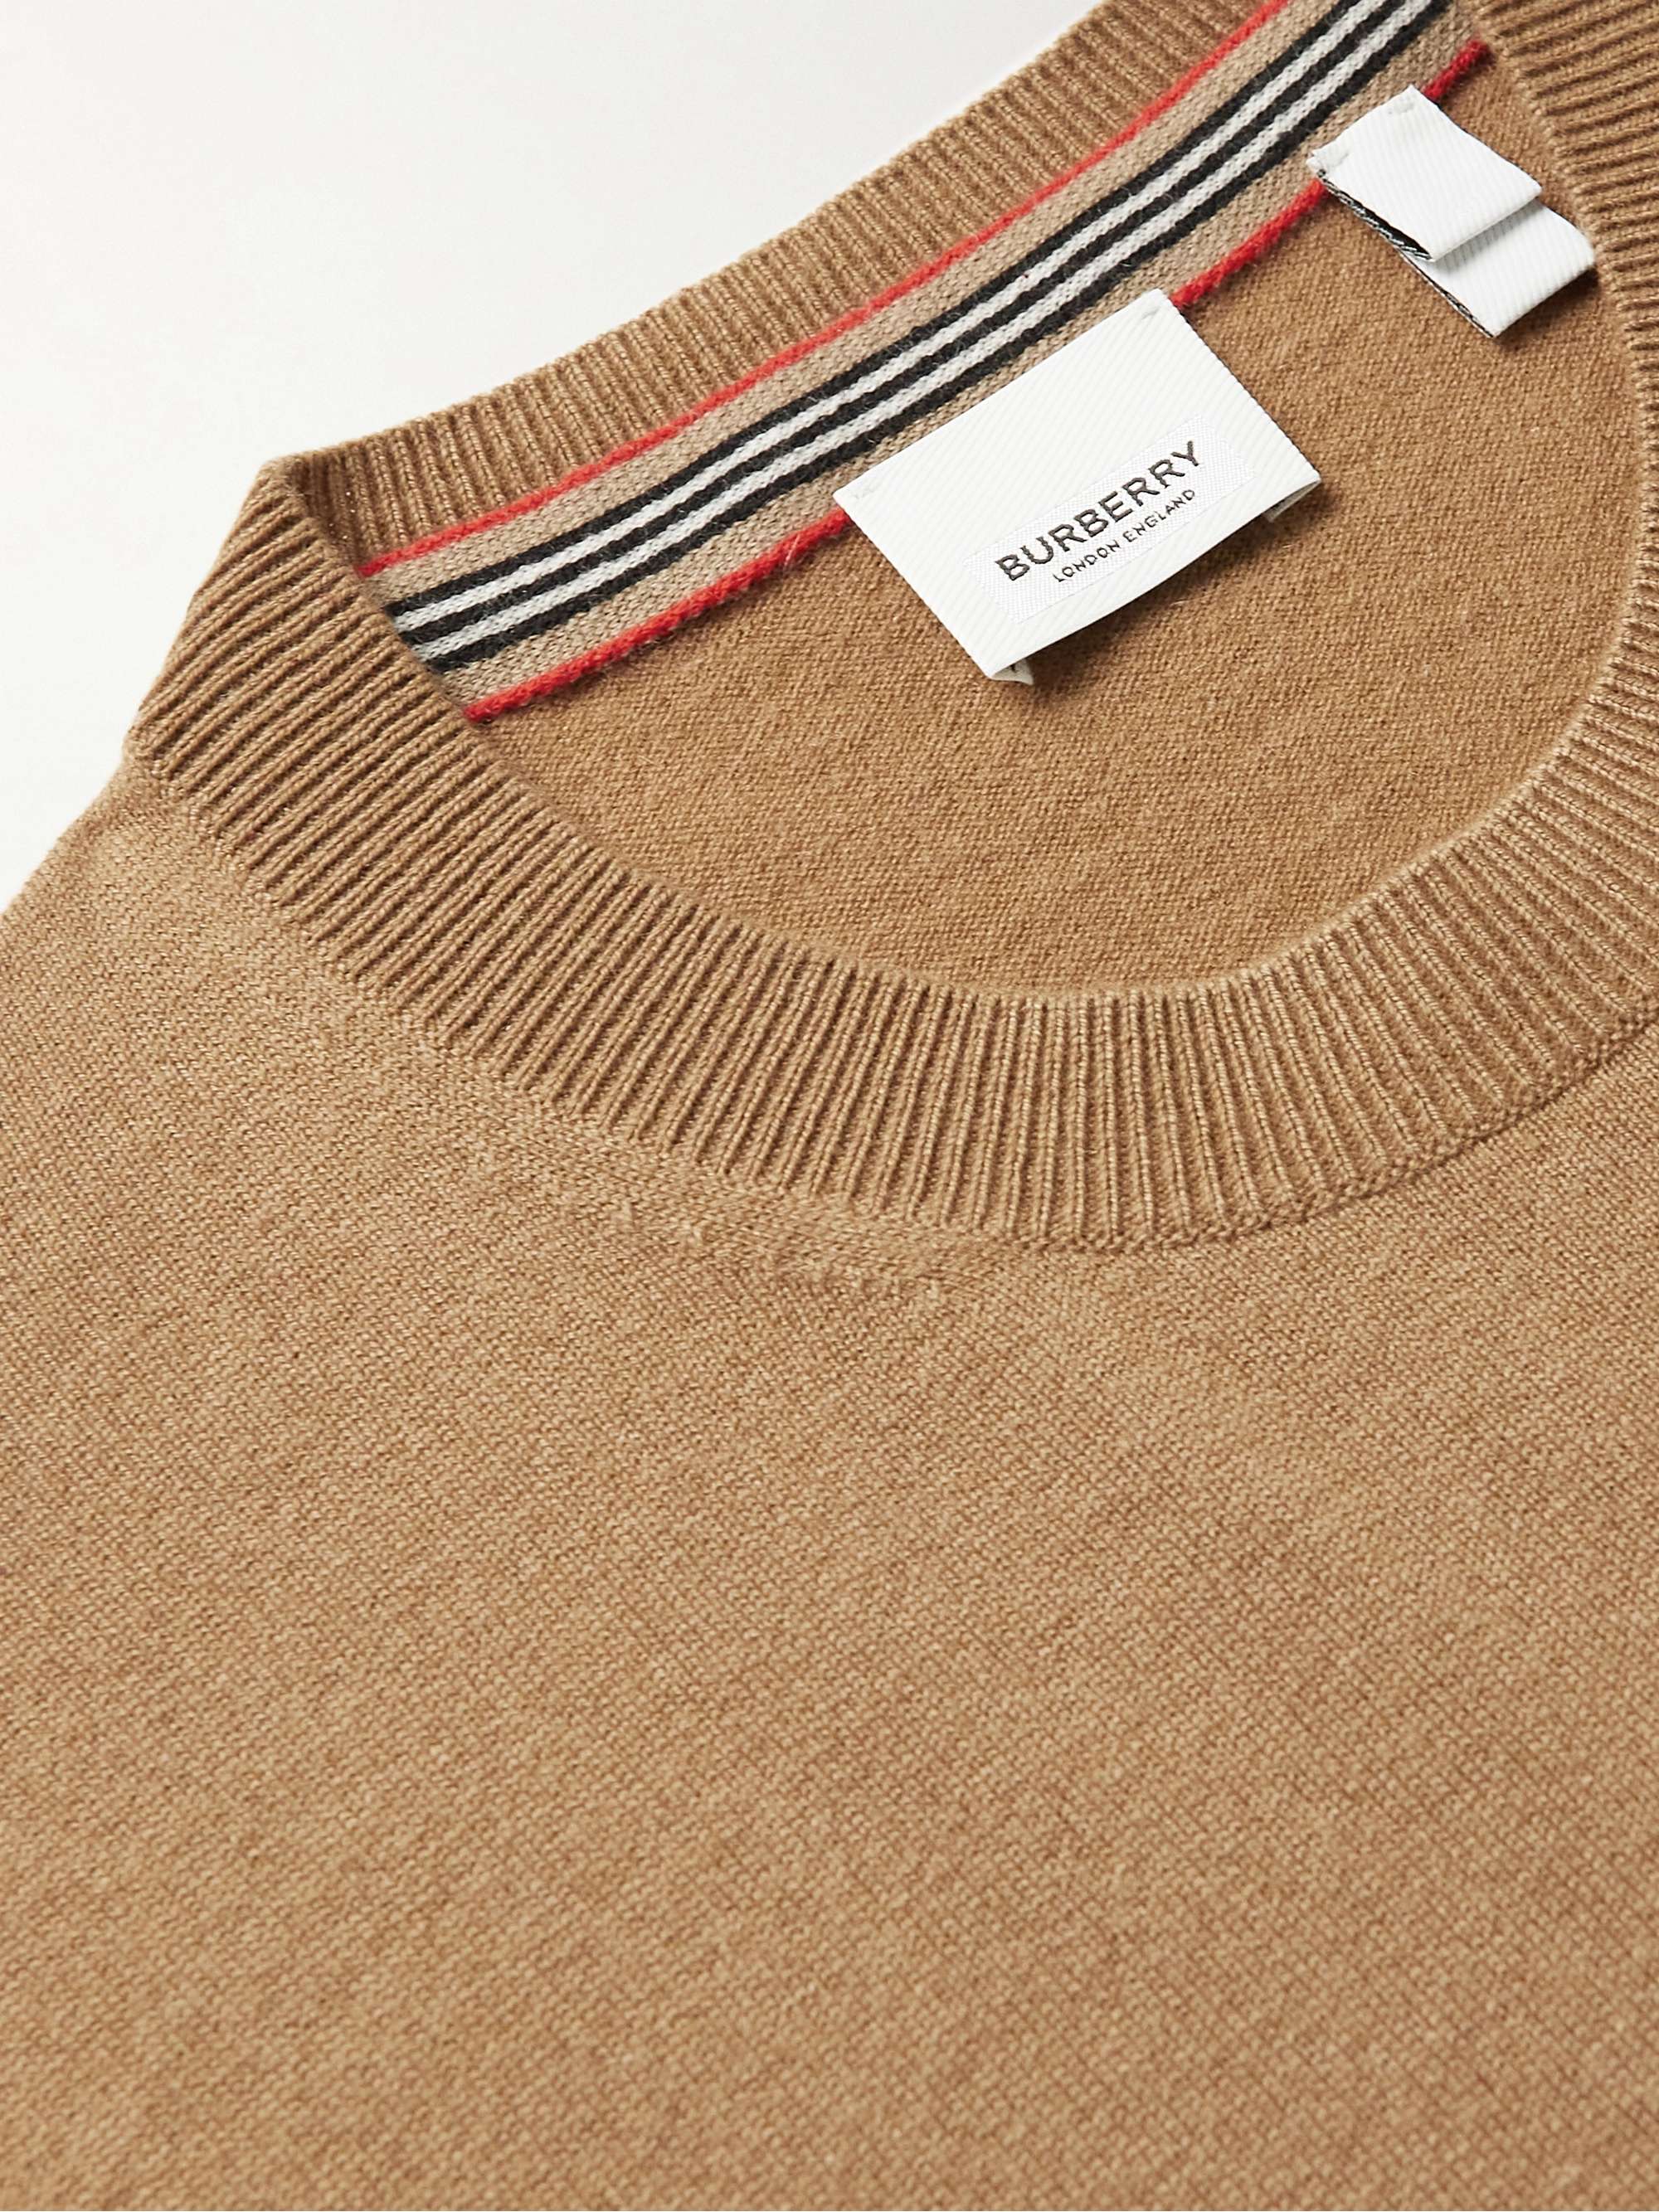 BURBERRY Logo-Embroidered Cashmere Sweater